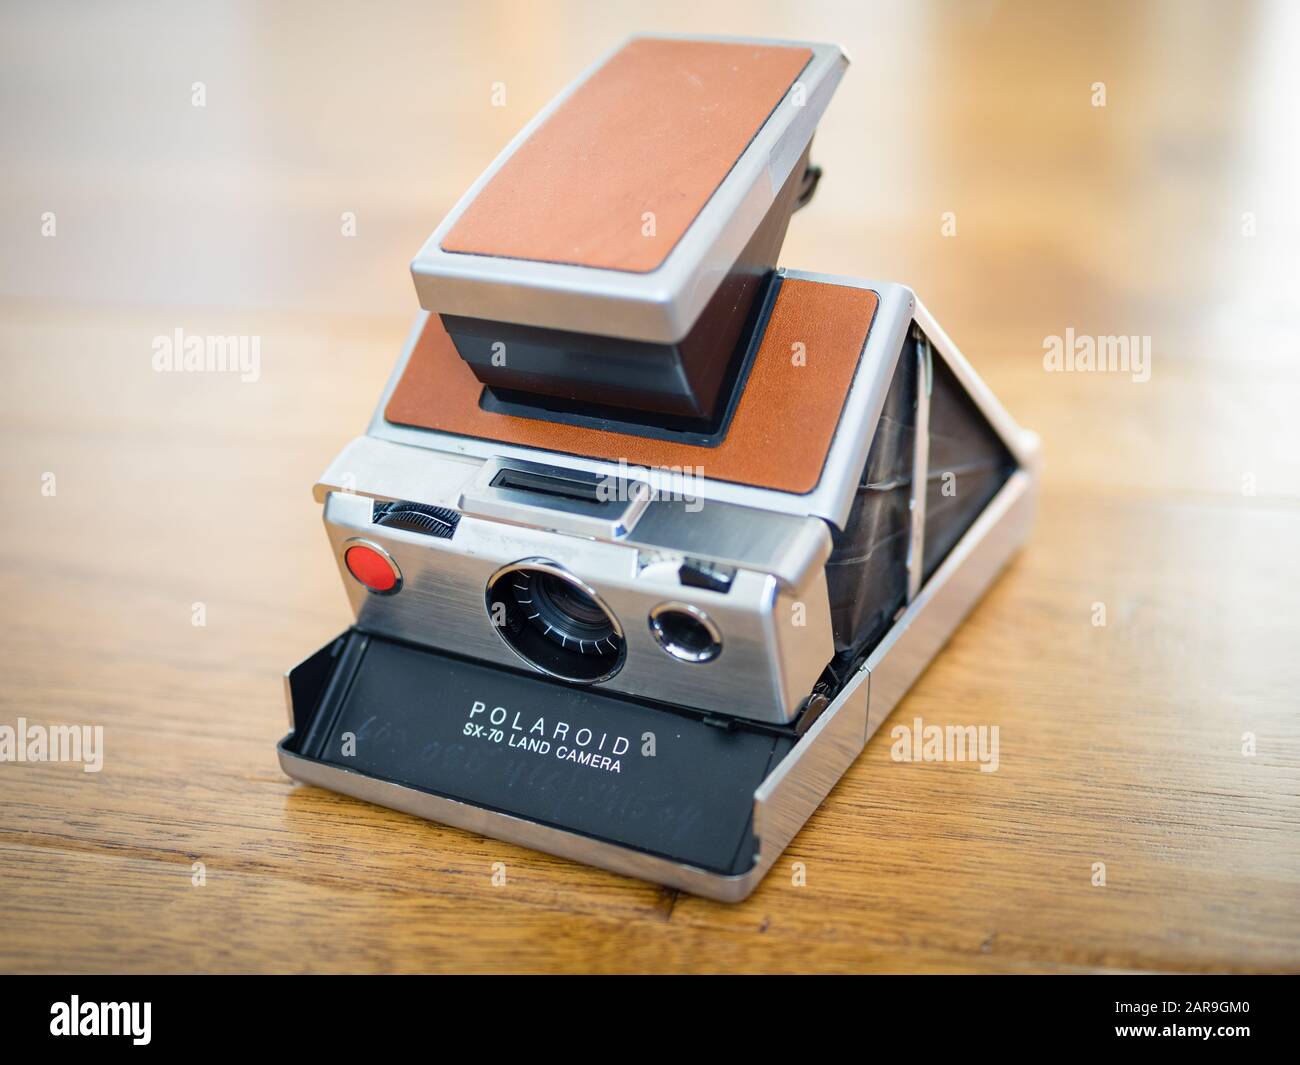 An original Polaroid SX-70 Land Camera, a folding single lens reflex instant camera which was first produced by the Polaroid Corporation in 1972. Stock Photo